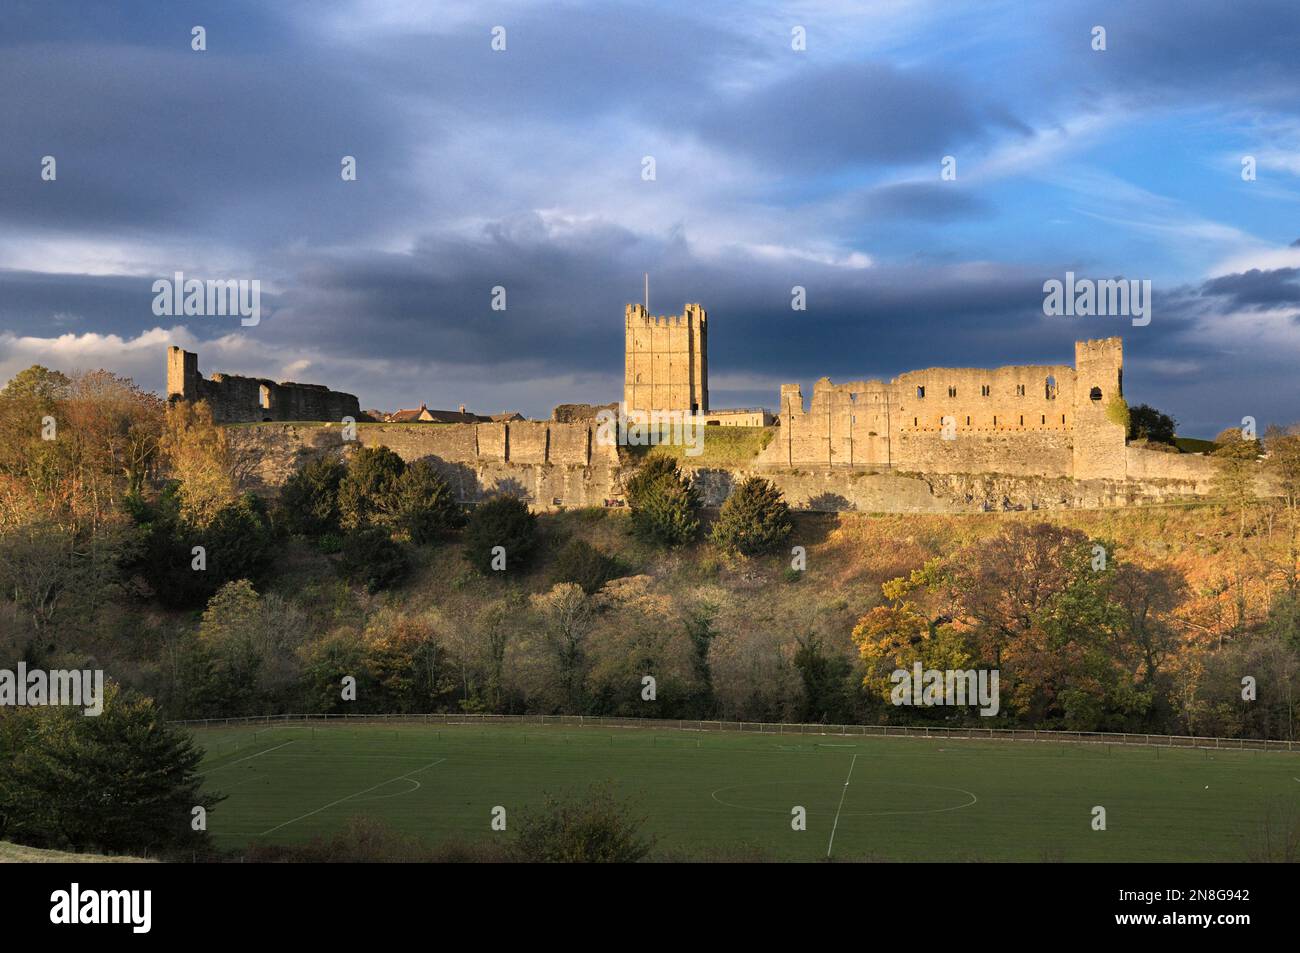 A view of Richmond Castle, 1070, one of the best-preserved examples of an early Norman castle in England. Richmondshire, North Yorkshire, UK.  Castles Stock Photo